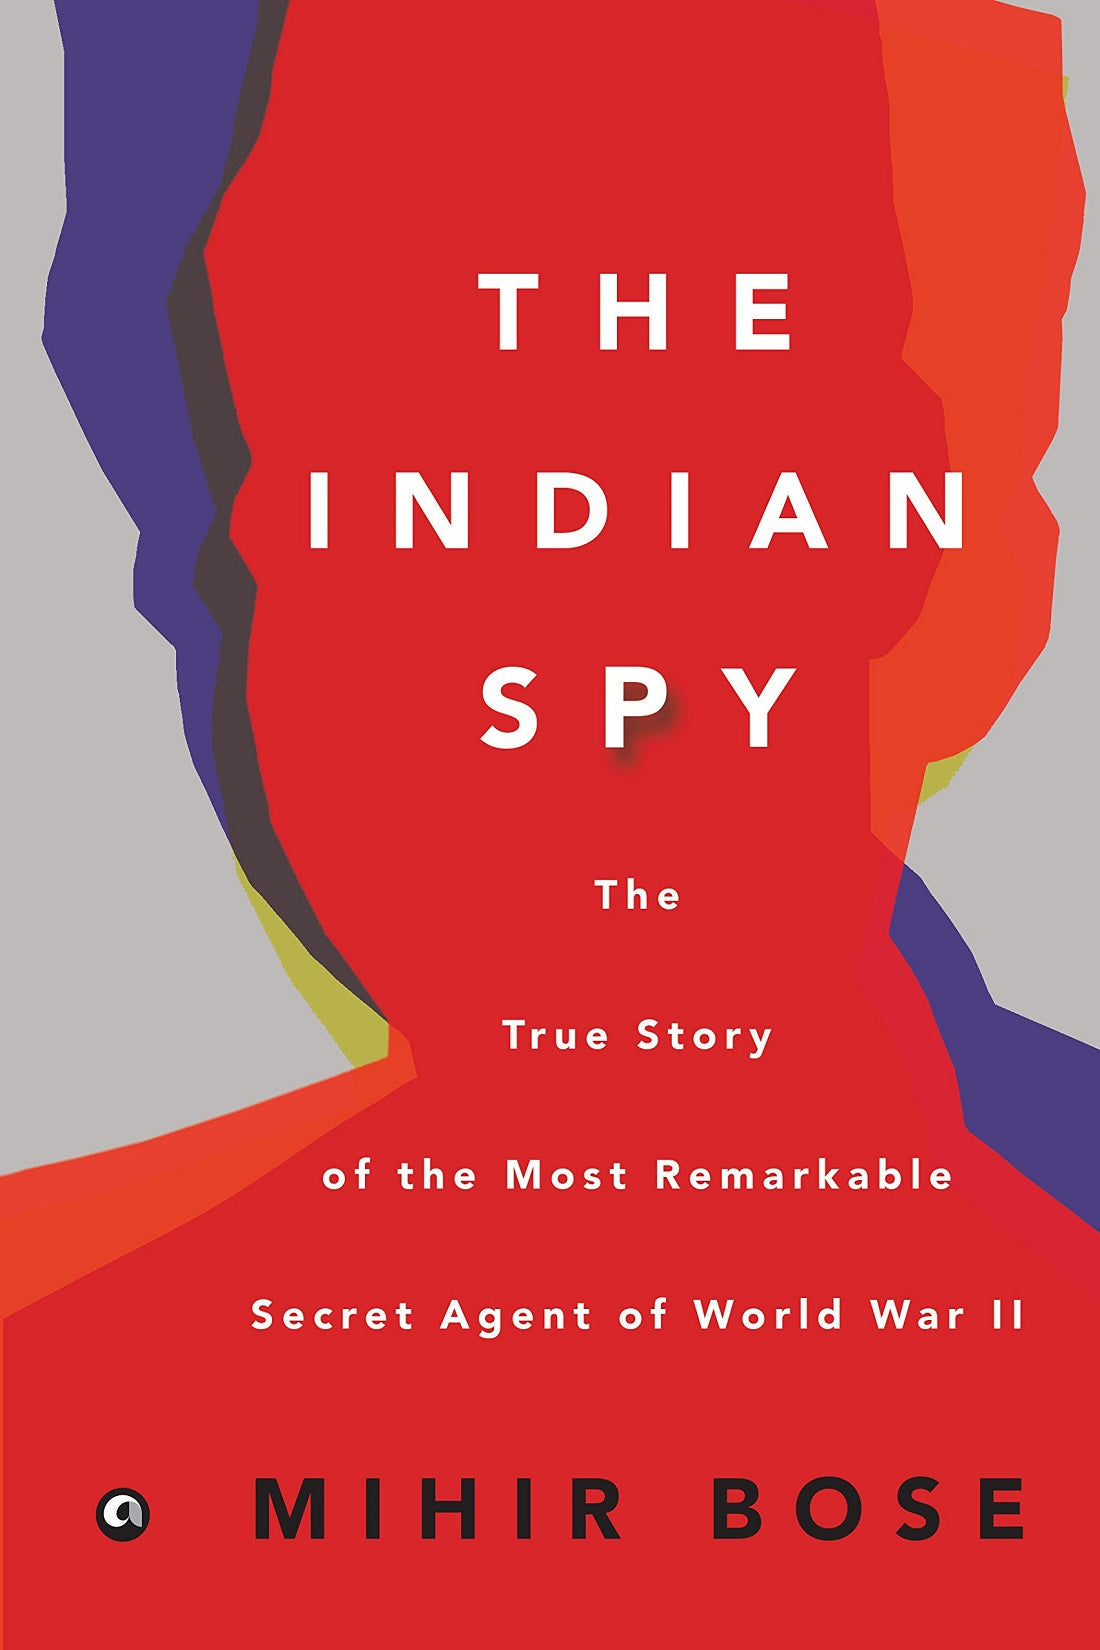 THE INDIAN SPY